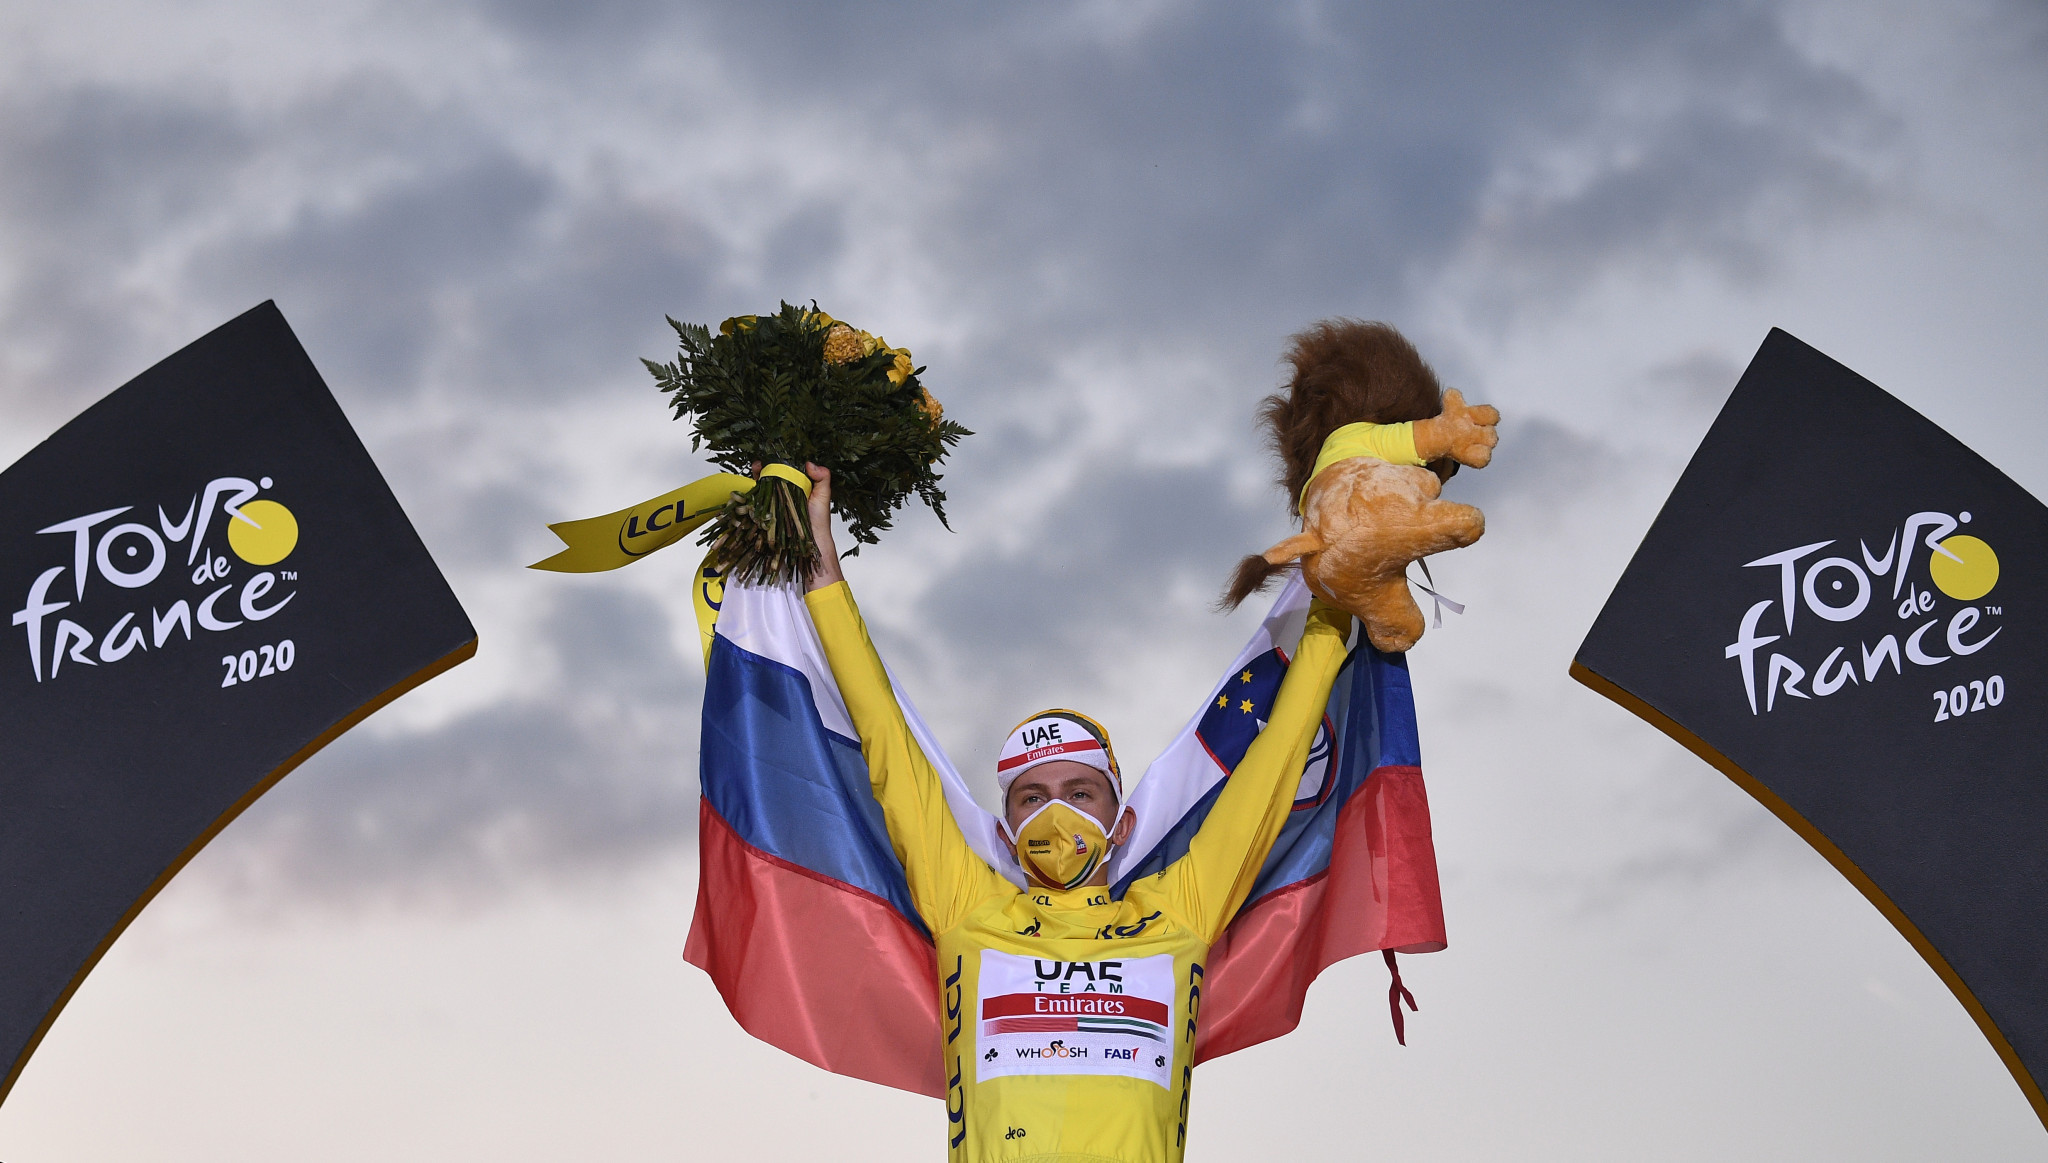 An inspired final time trial performance allowed Slovenia's Tadej Pogačar to earn an unexpected triumph in this year's Tour de France as he became the event's youngest winner since 1904 ©Getty Images